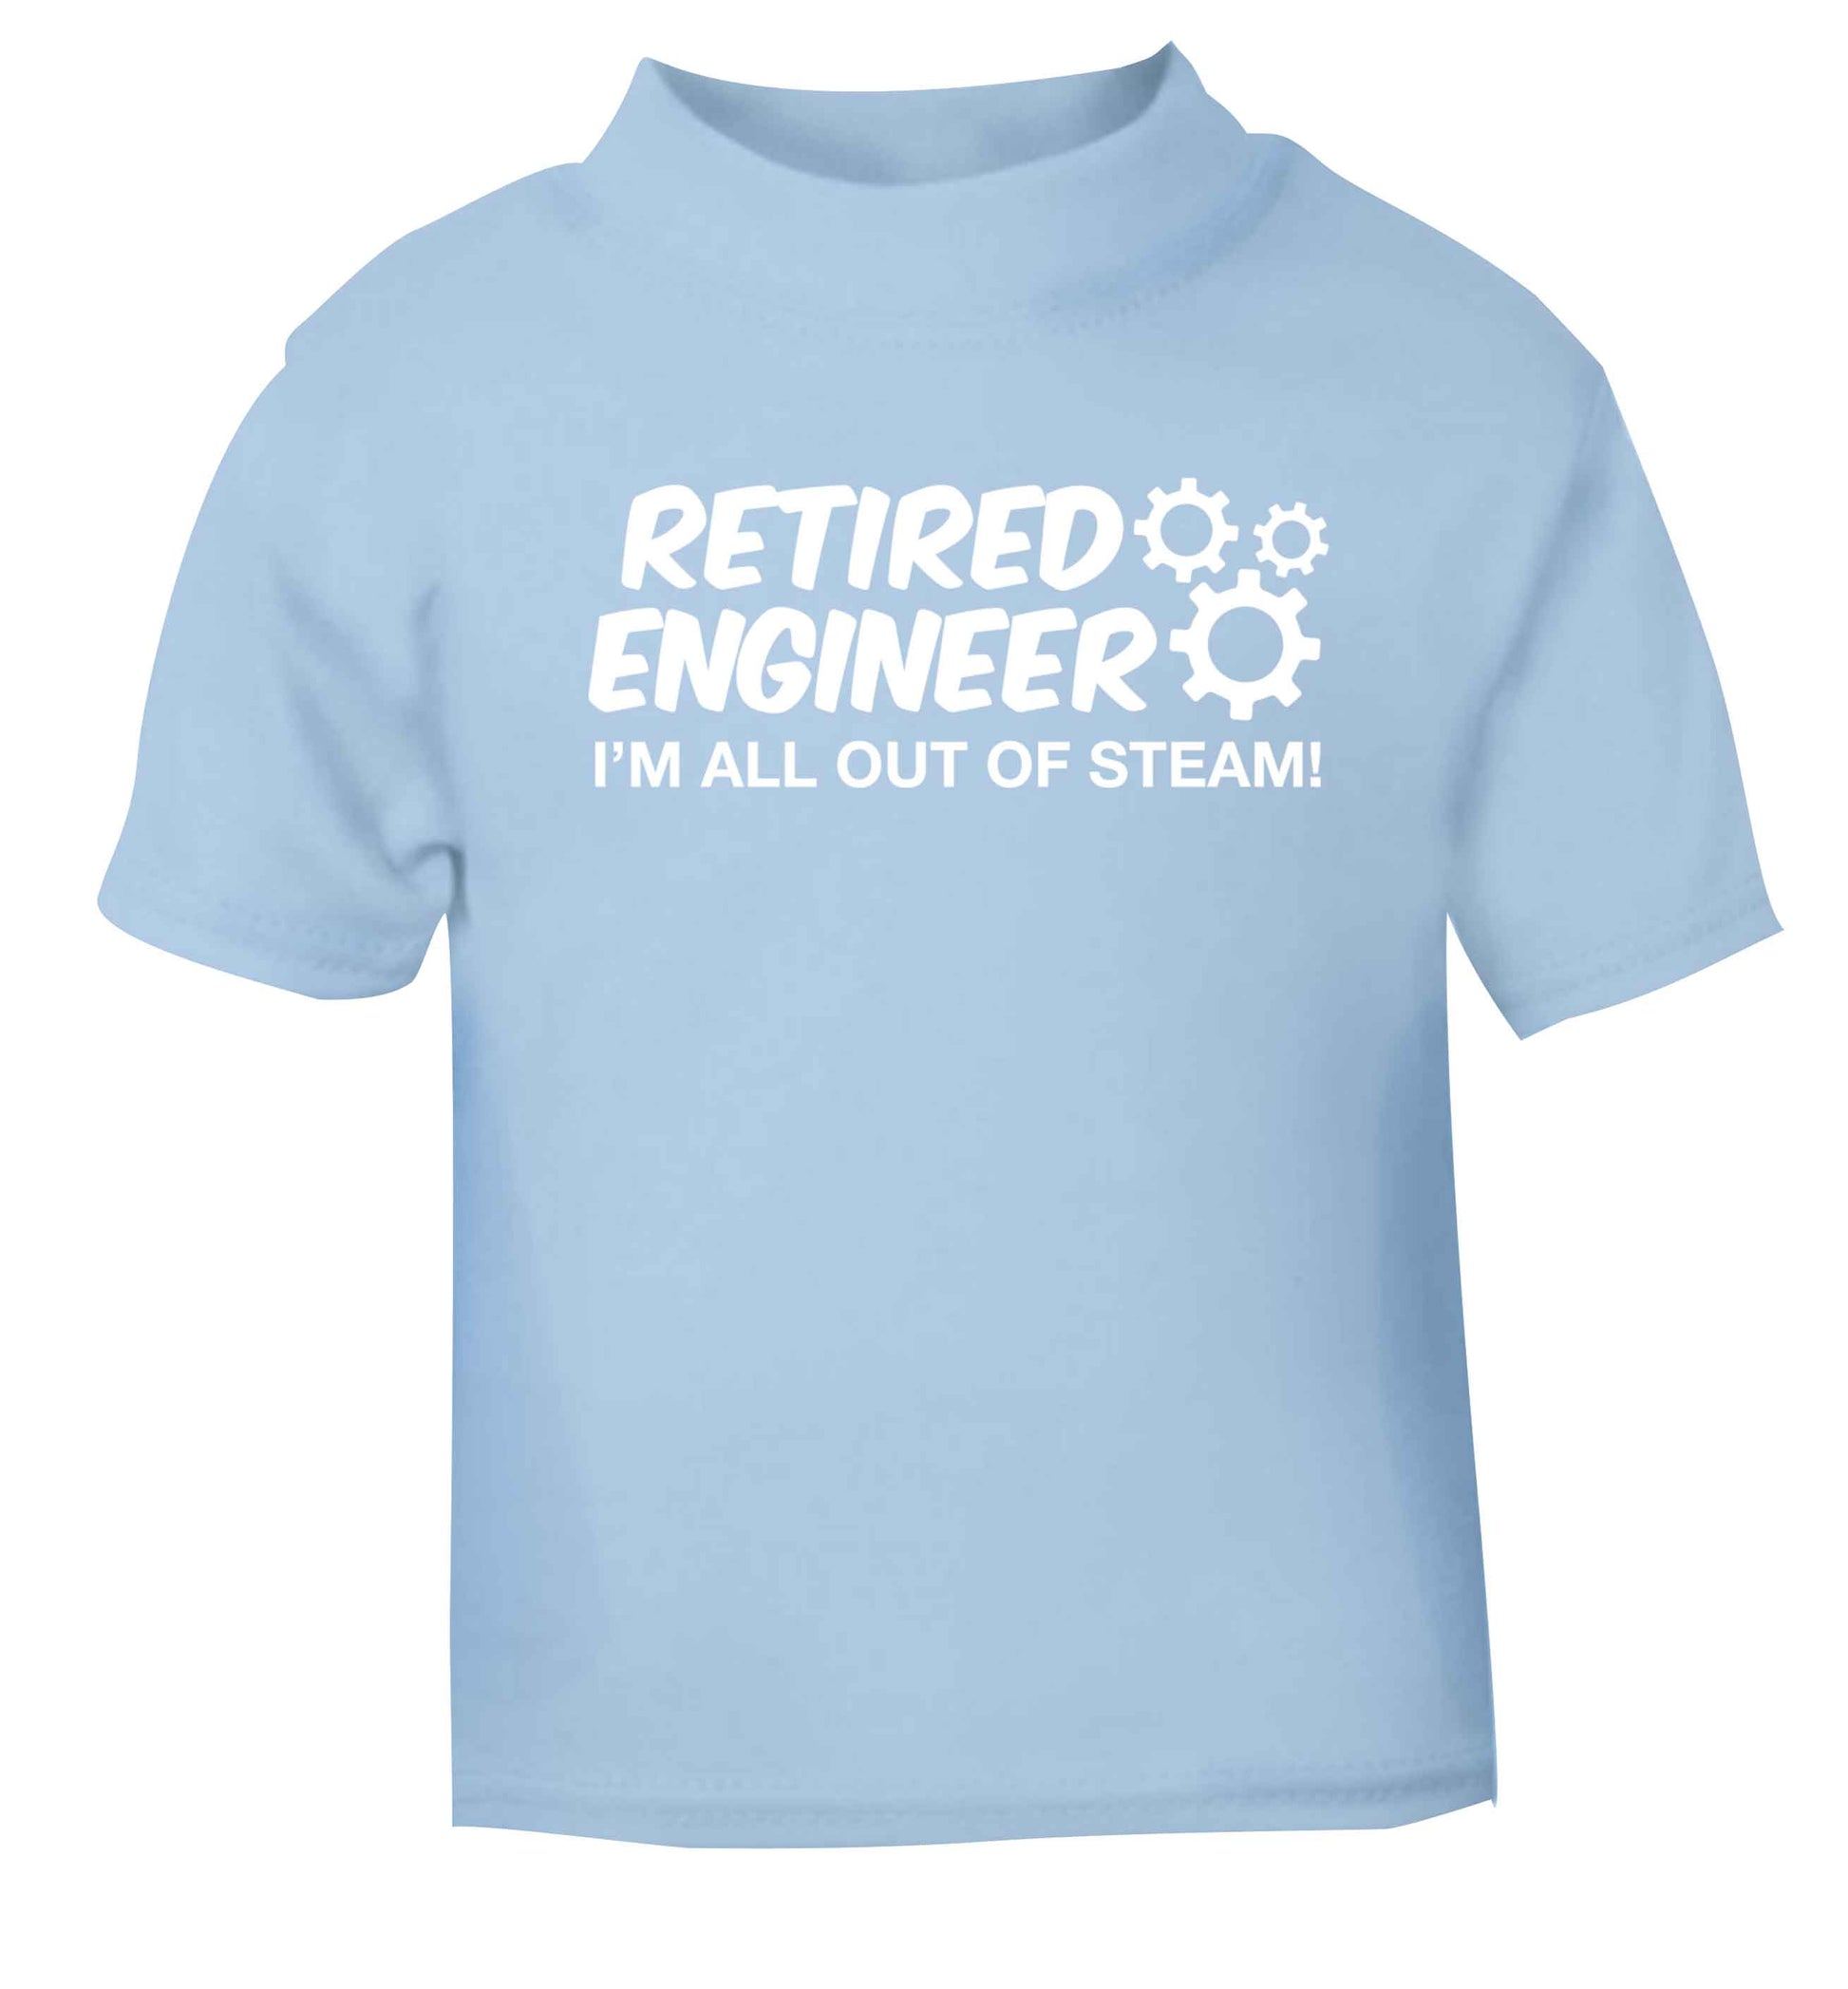 Retired engineer I'm all out of steam light blue Baby Toddler Tshirt 2 Years